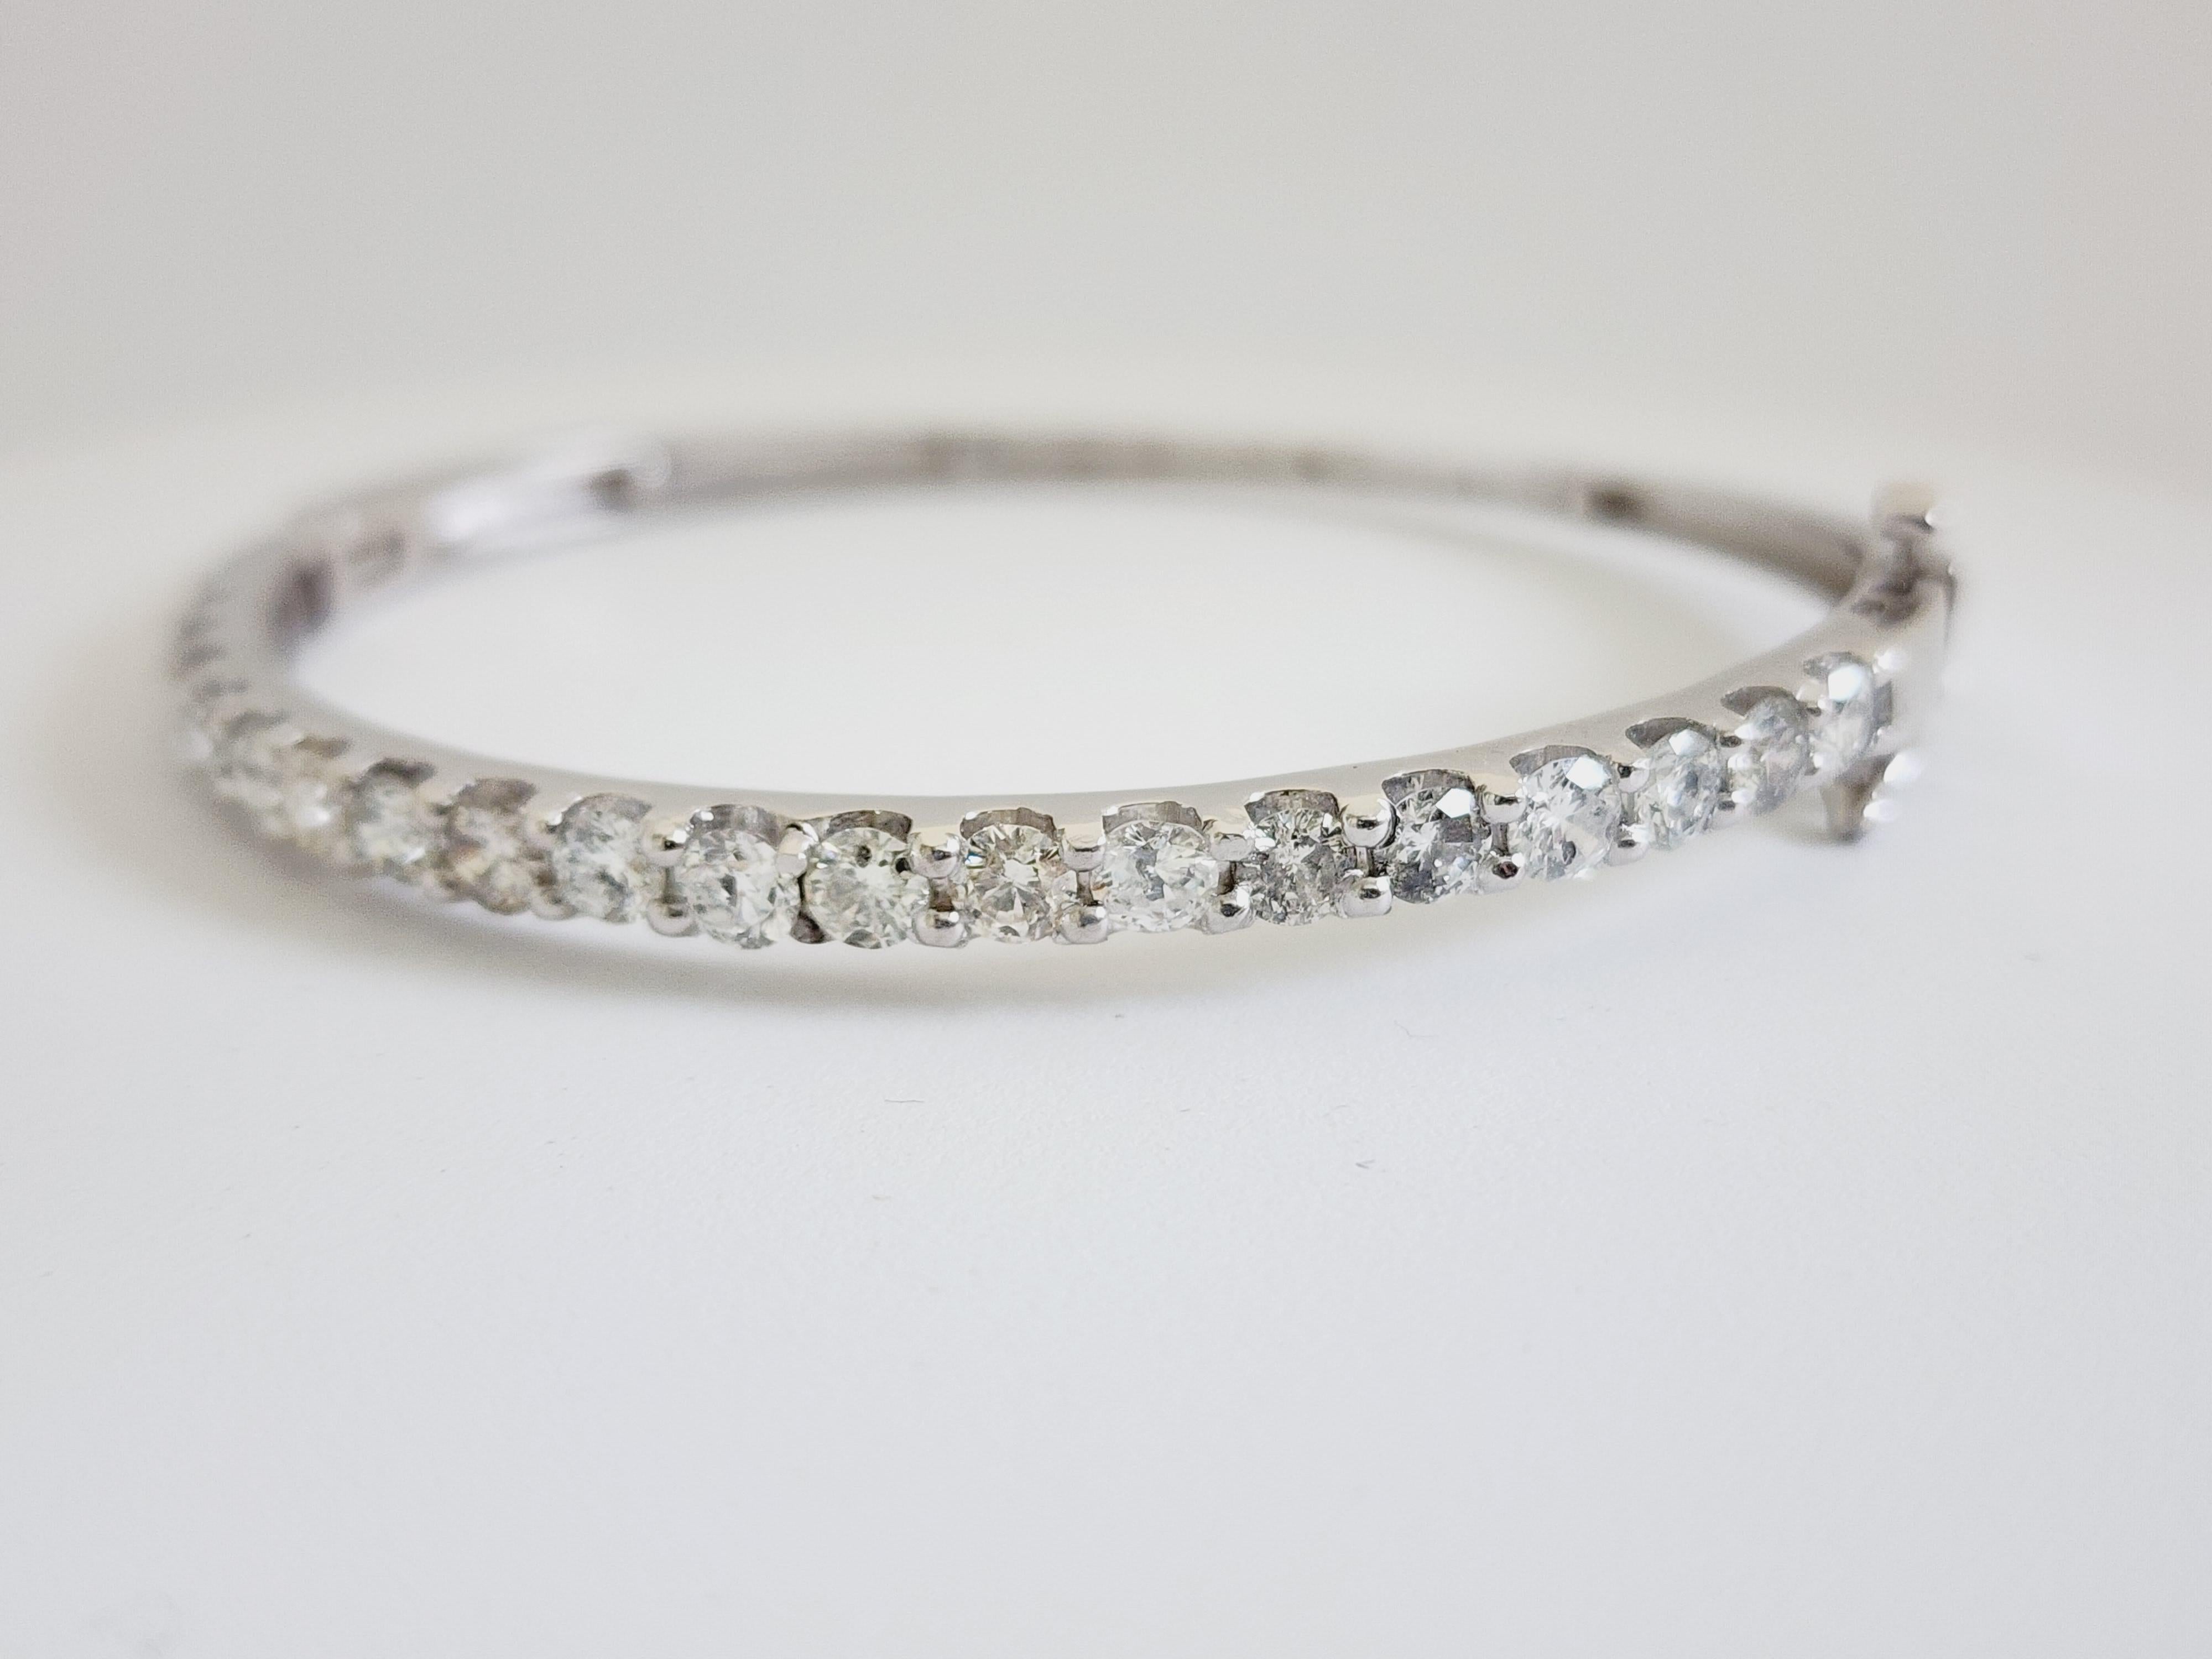 Natural Diamonds 3.73 ctw half way around bangle white gold 14k 7 Inch. 
Average Color H Clarity I, 3.9 mm wide.